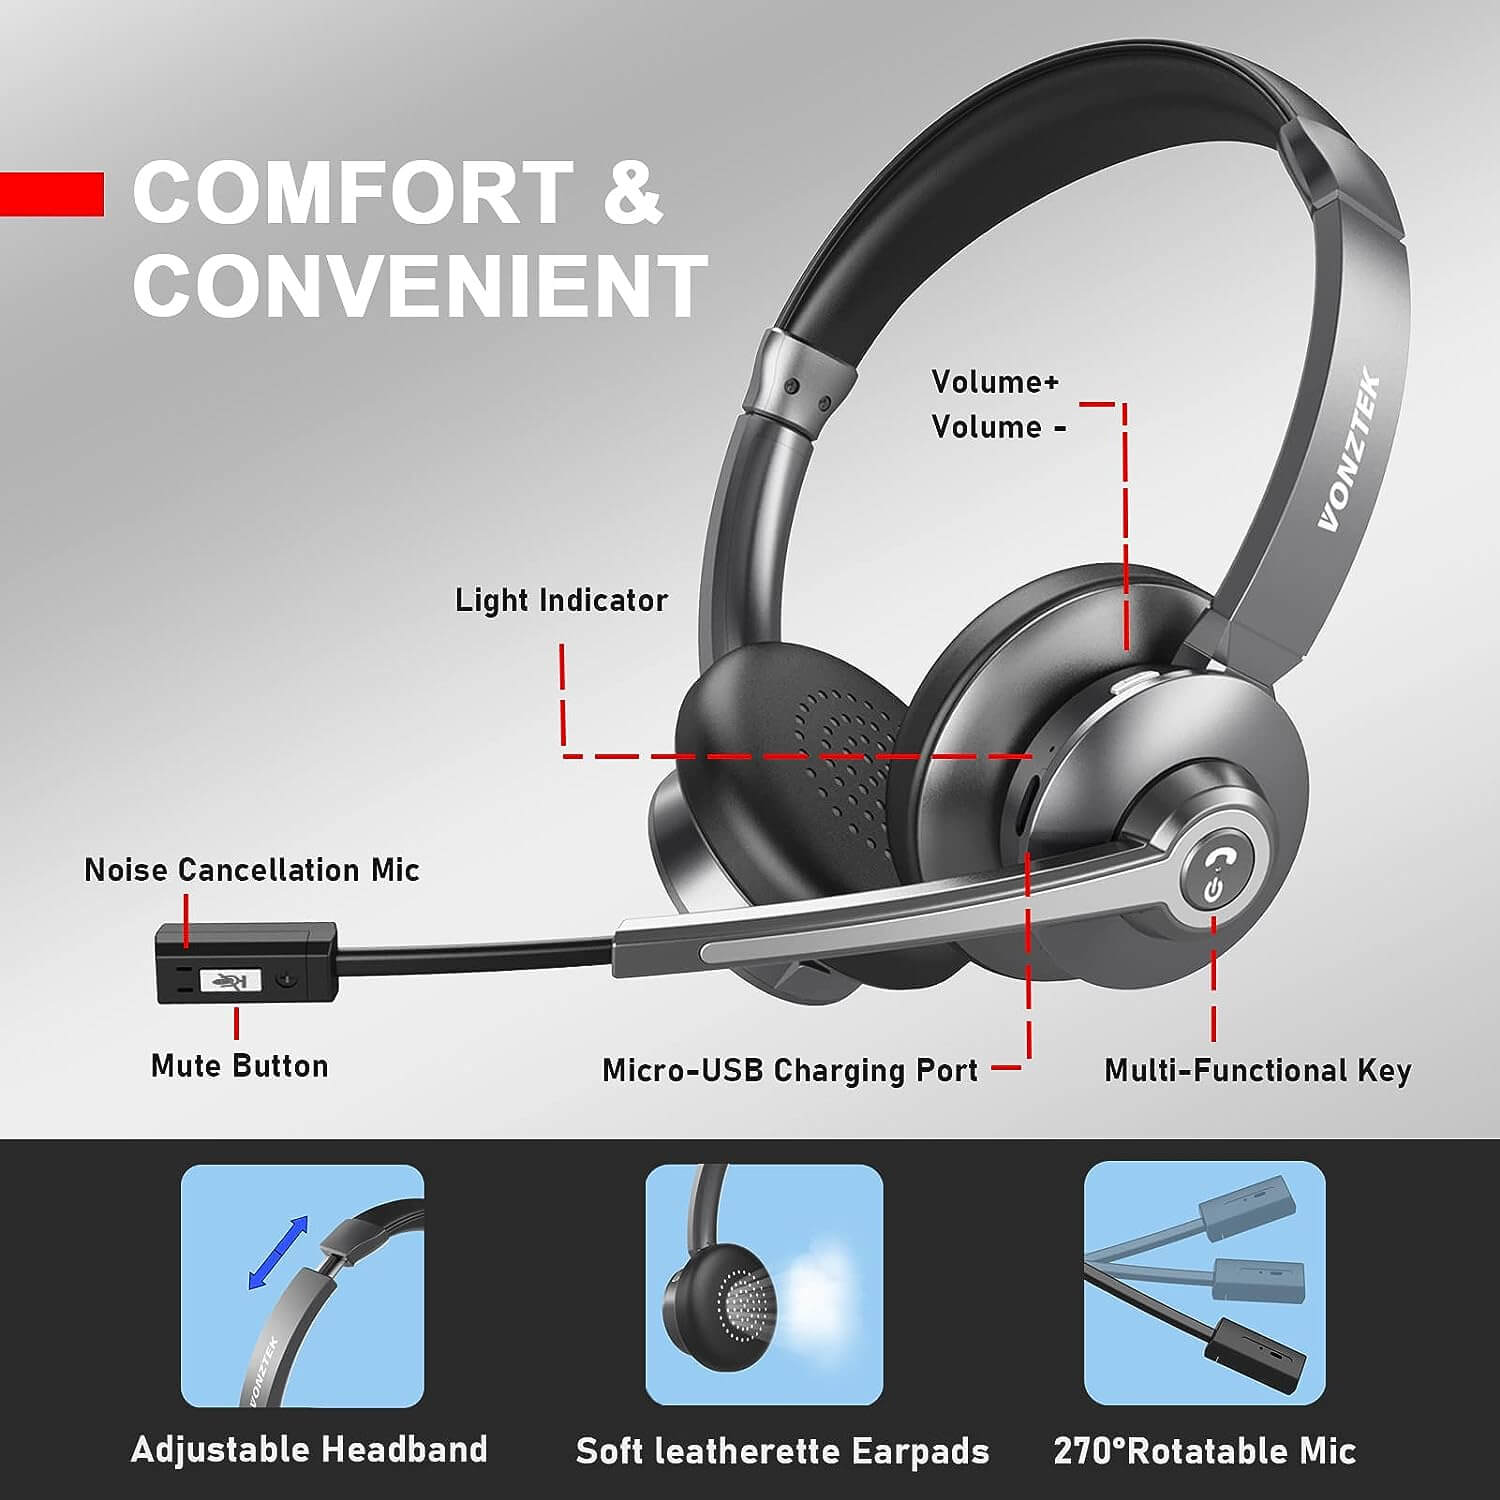 Comfort & convenient,Noise cancellation mic,Mute button,Micro-USB charging port ,Multi-Functional key,Light indicator,Volume+,Volume-.